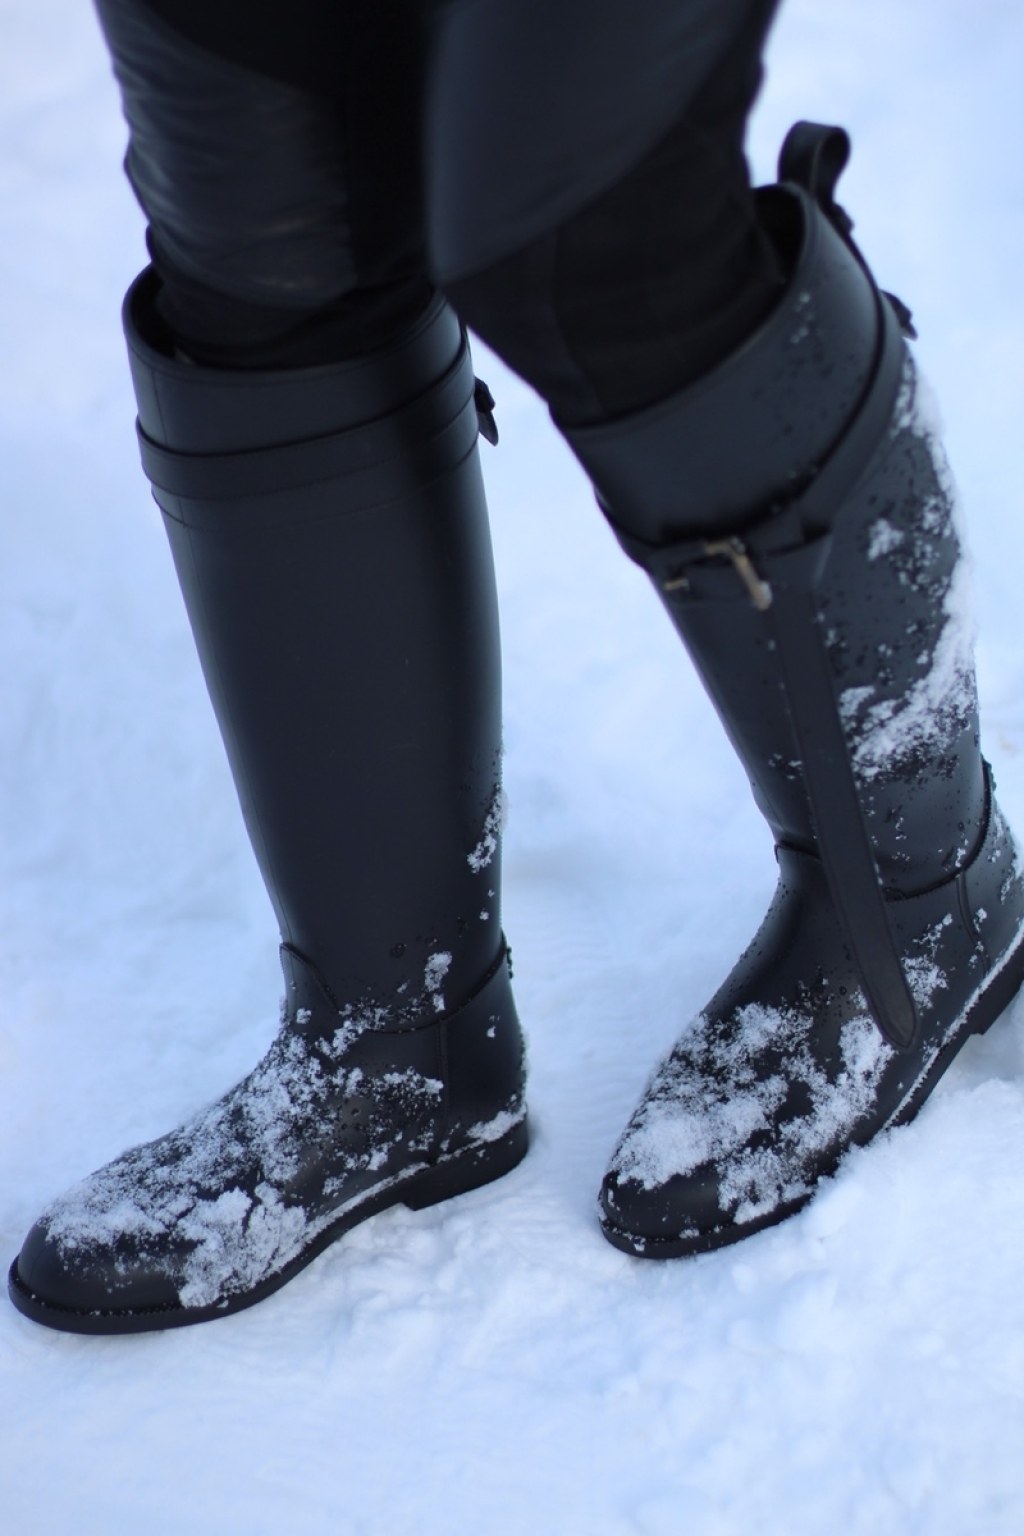 Picture of: Rain Boots and Socks in the Snow: A Do or Don’t?